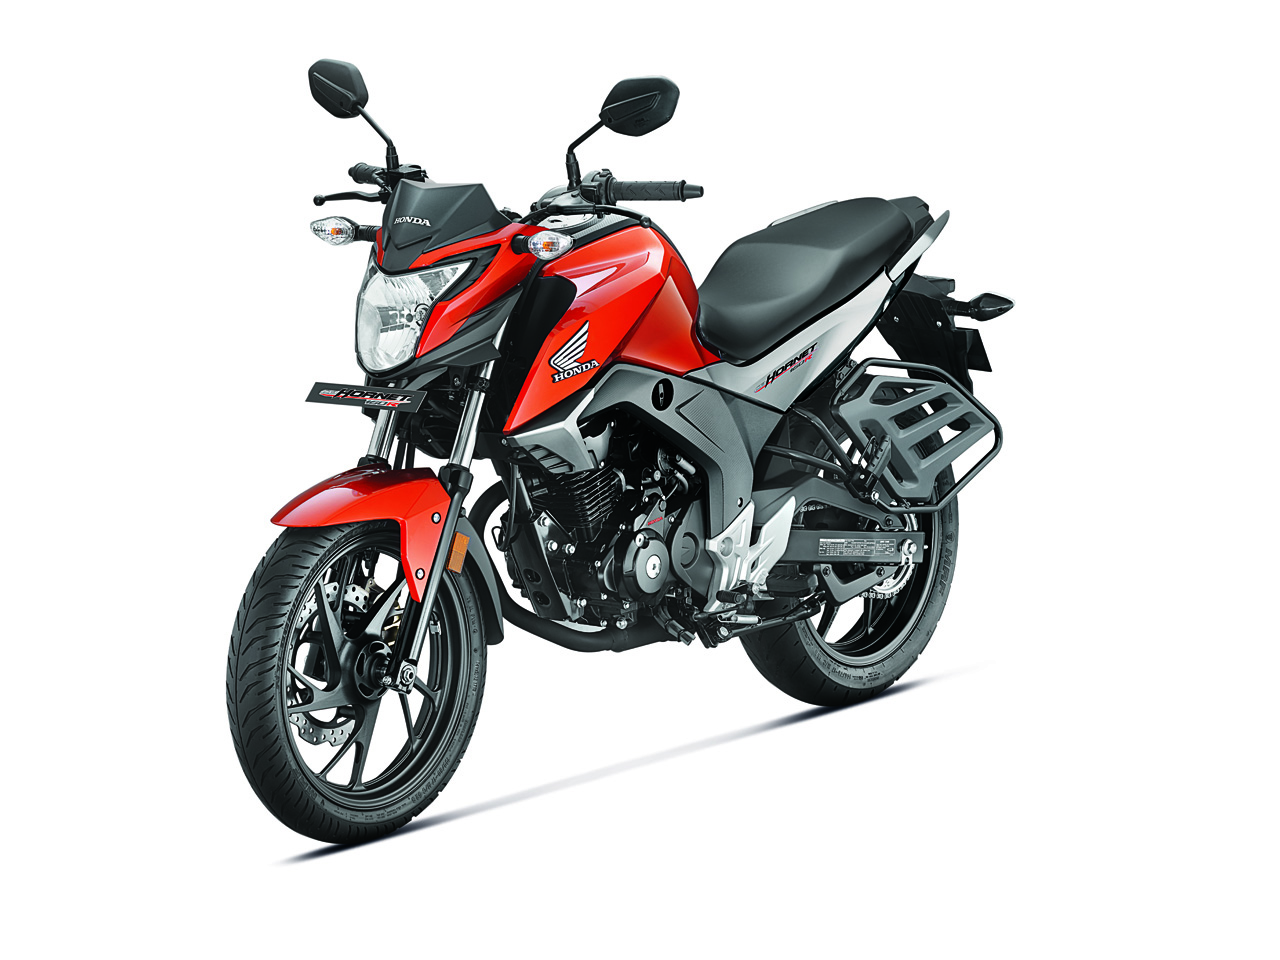 Free Download Honda Cb Hornet 160r Hd Wallpaper Images And Photo